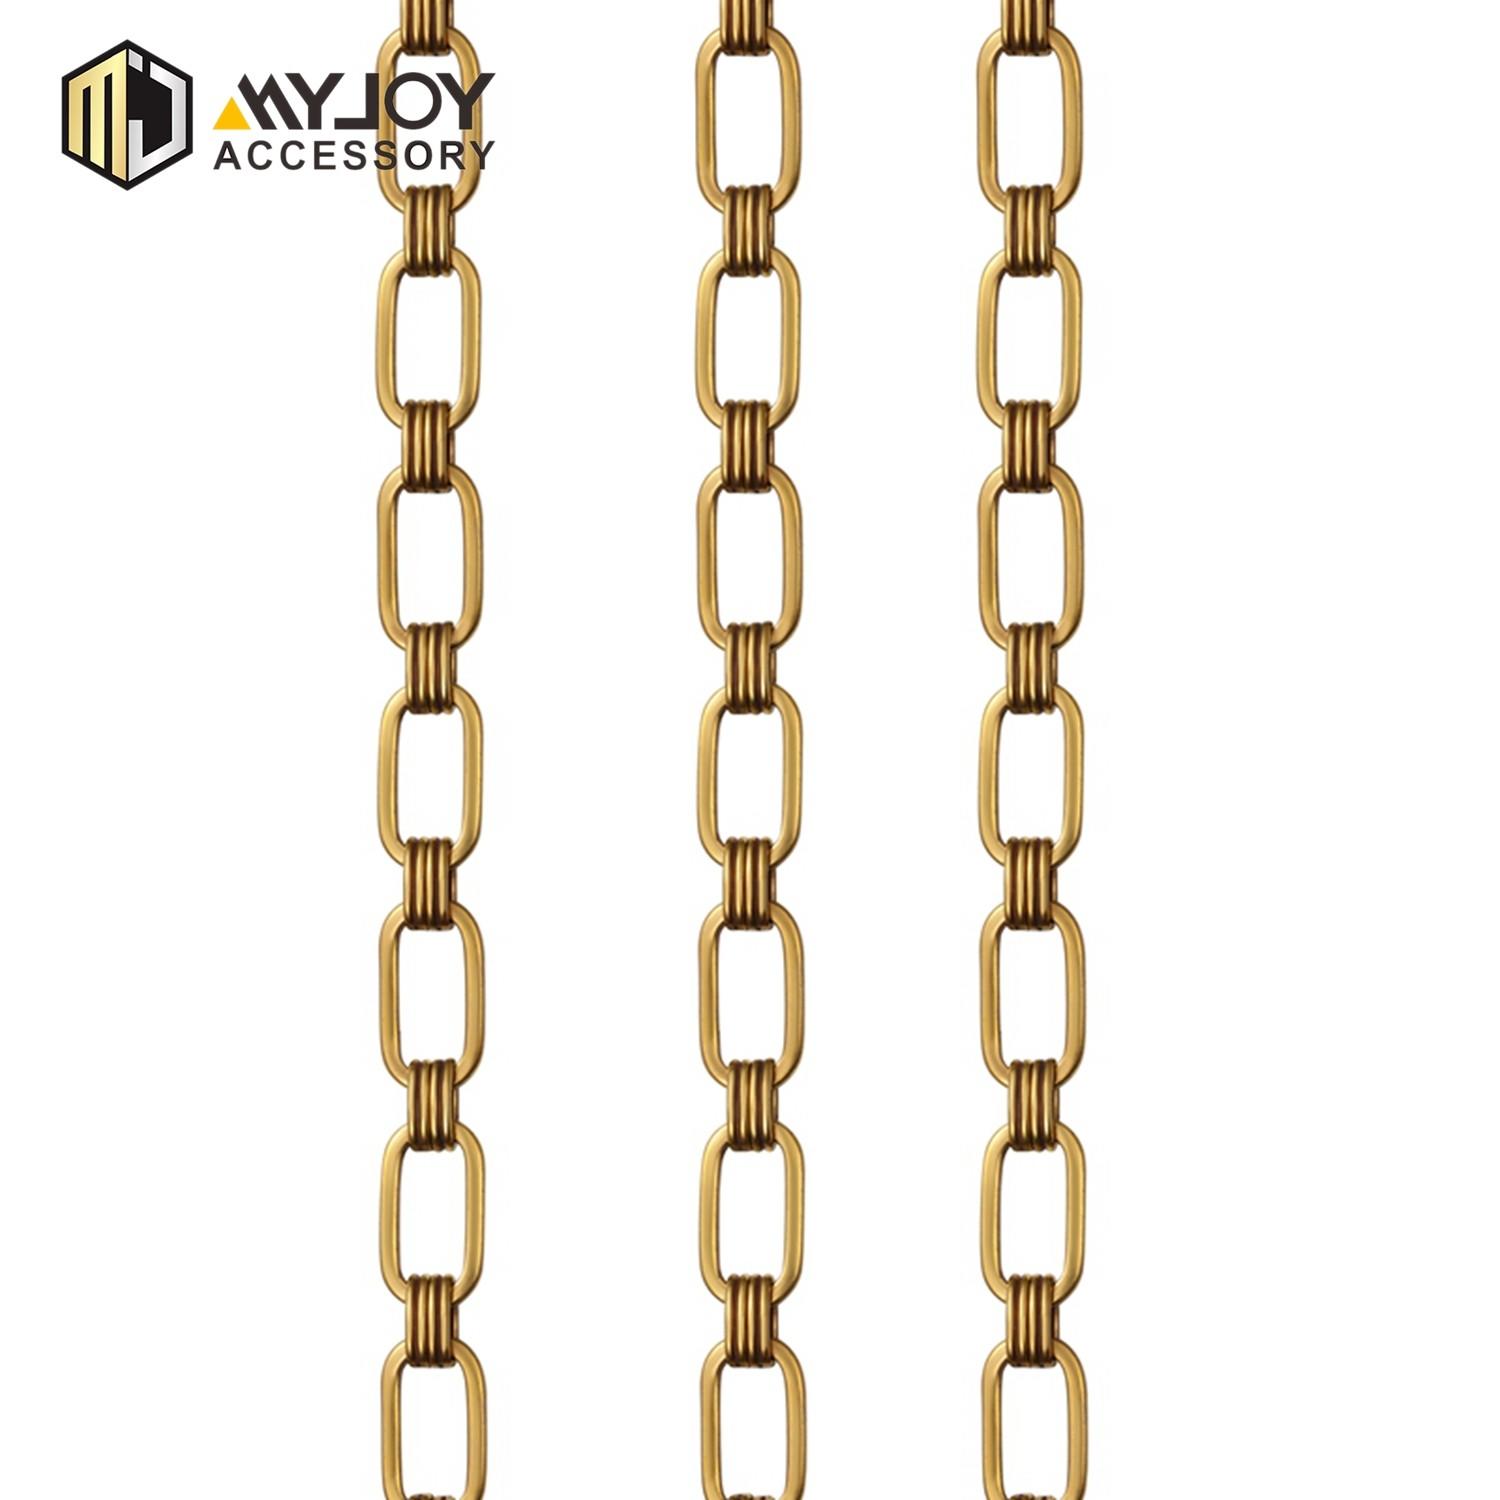 MYJOY color handbag chain strap factory for bags